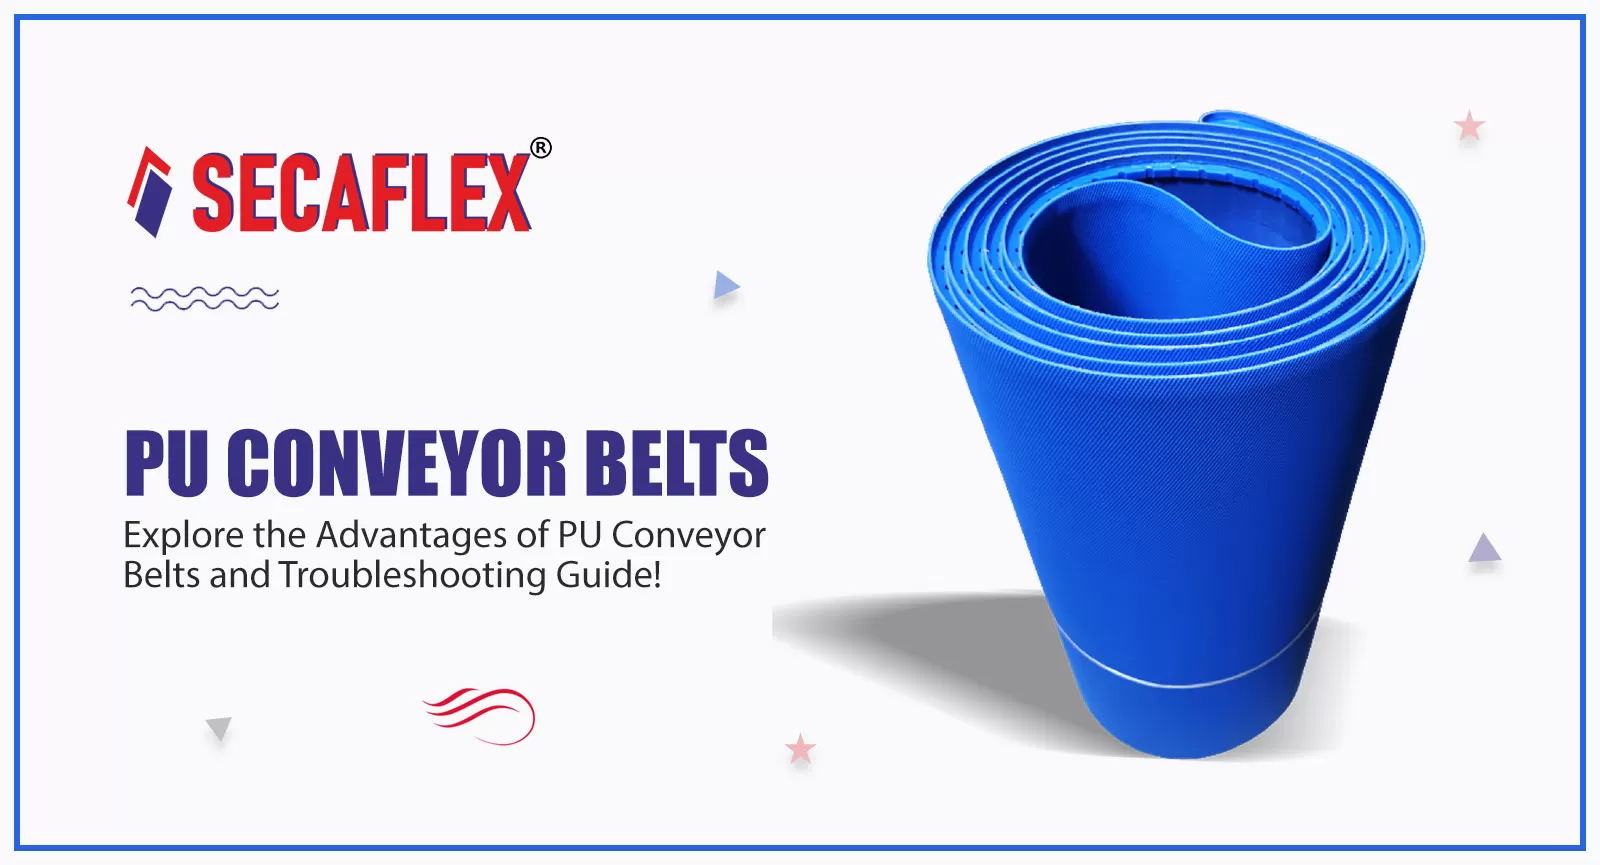 Explore the Advantages of PU Conveyor Belts and Troubleshooting Guide!